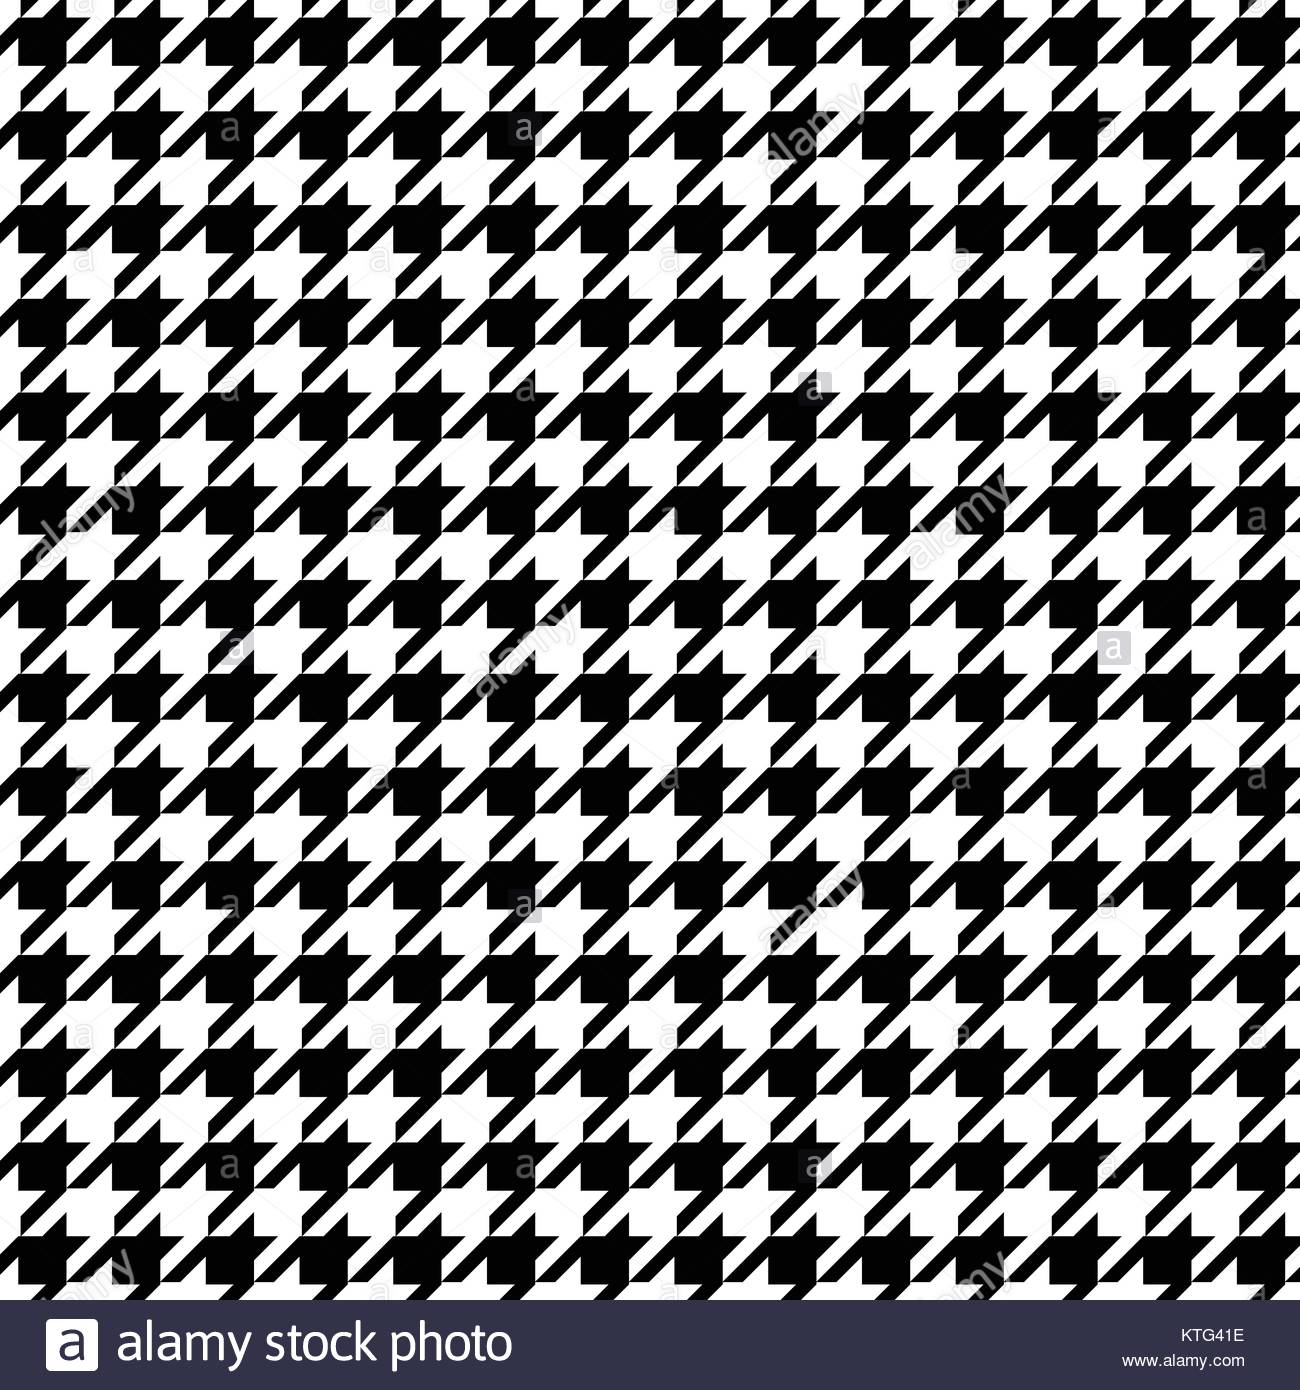 Seamless Background Image Of Black And White Houndstooth Check